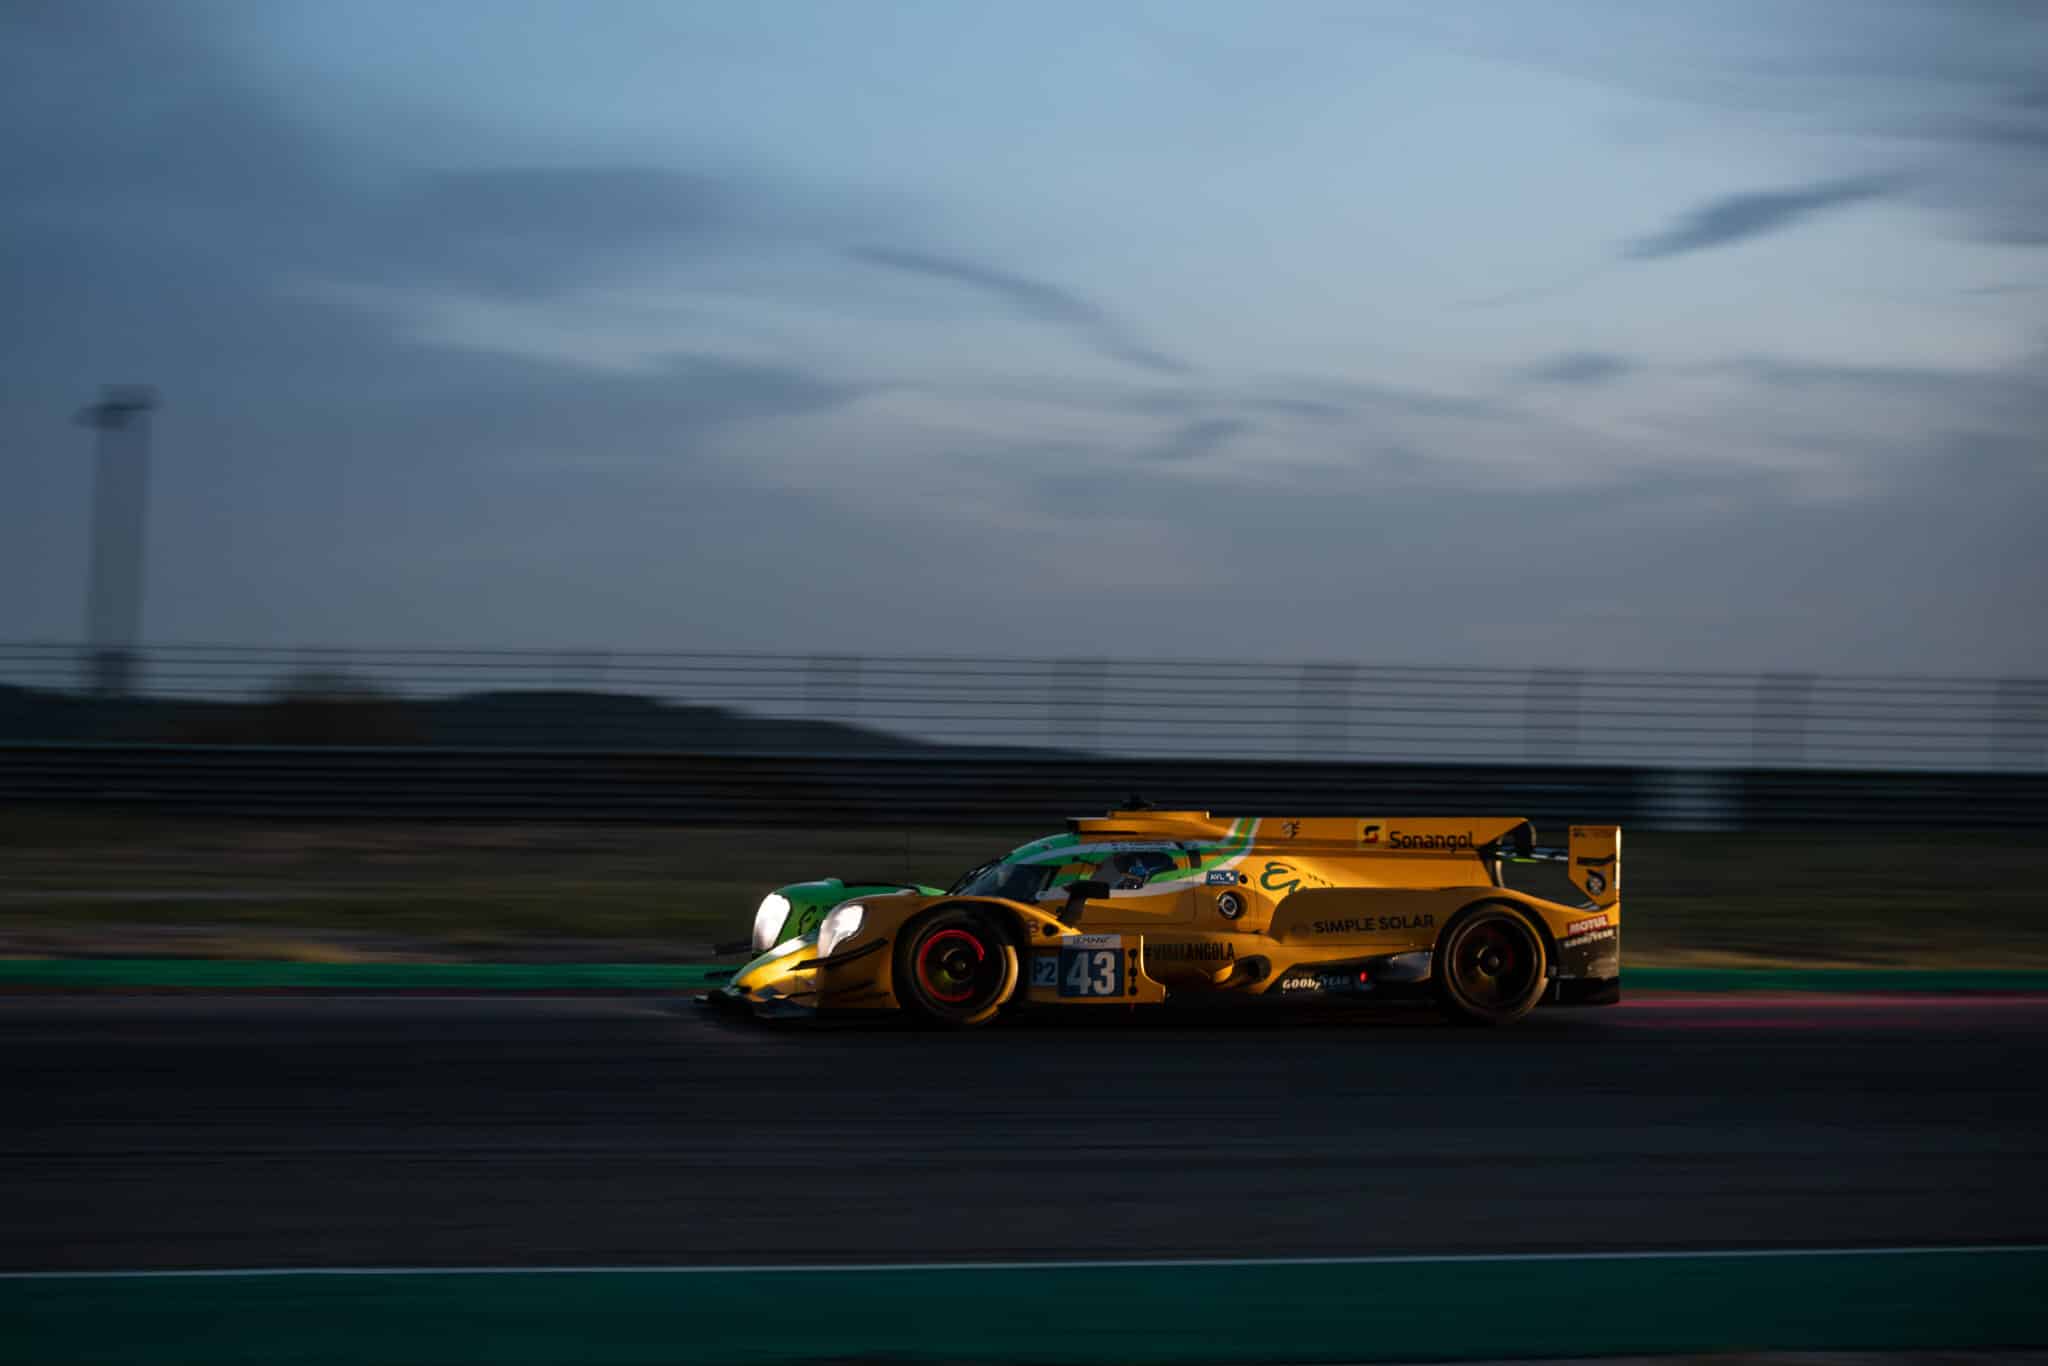 - FP2 4 Hours of Aragon: Inter Europol Fastest at sunset